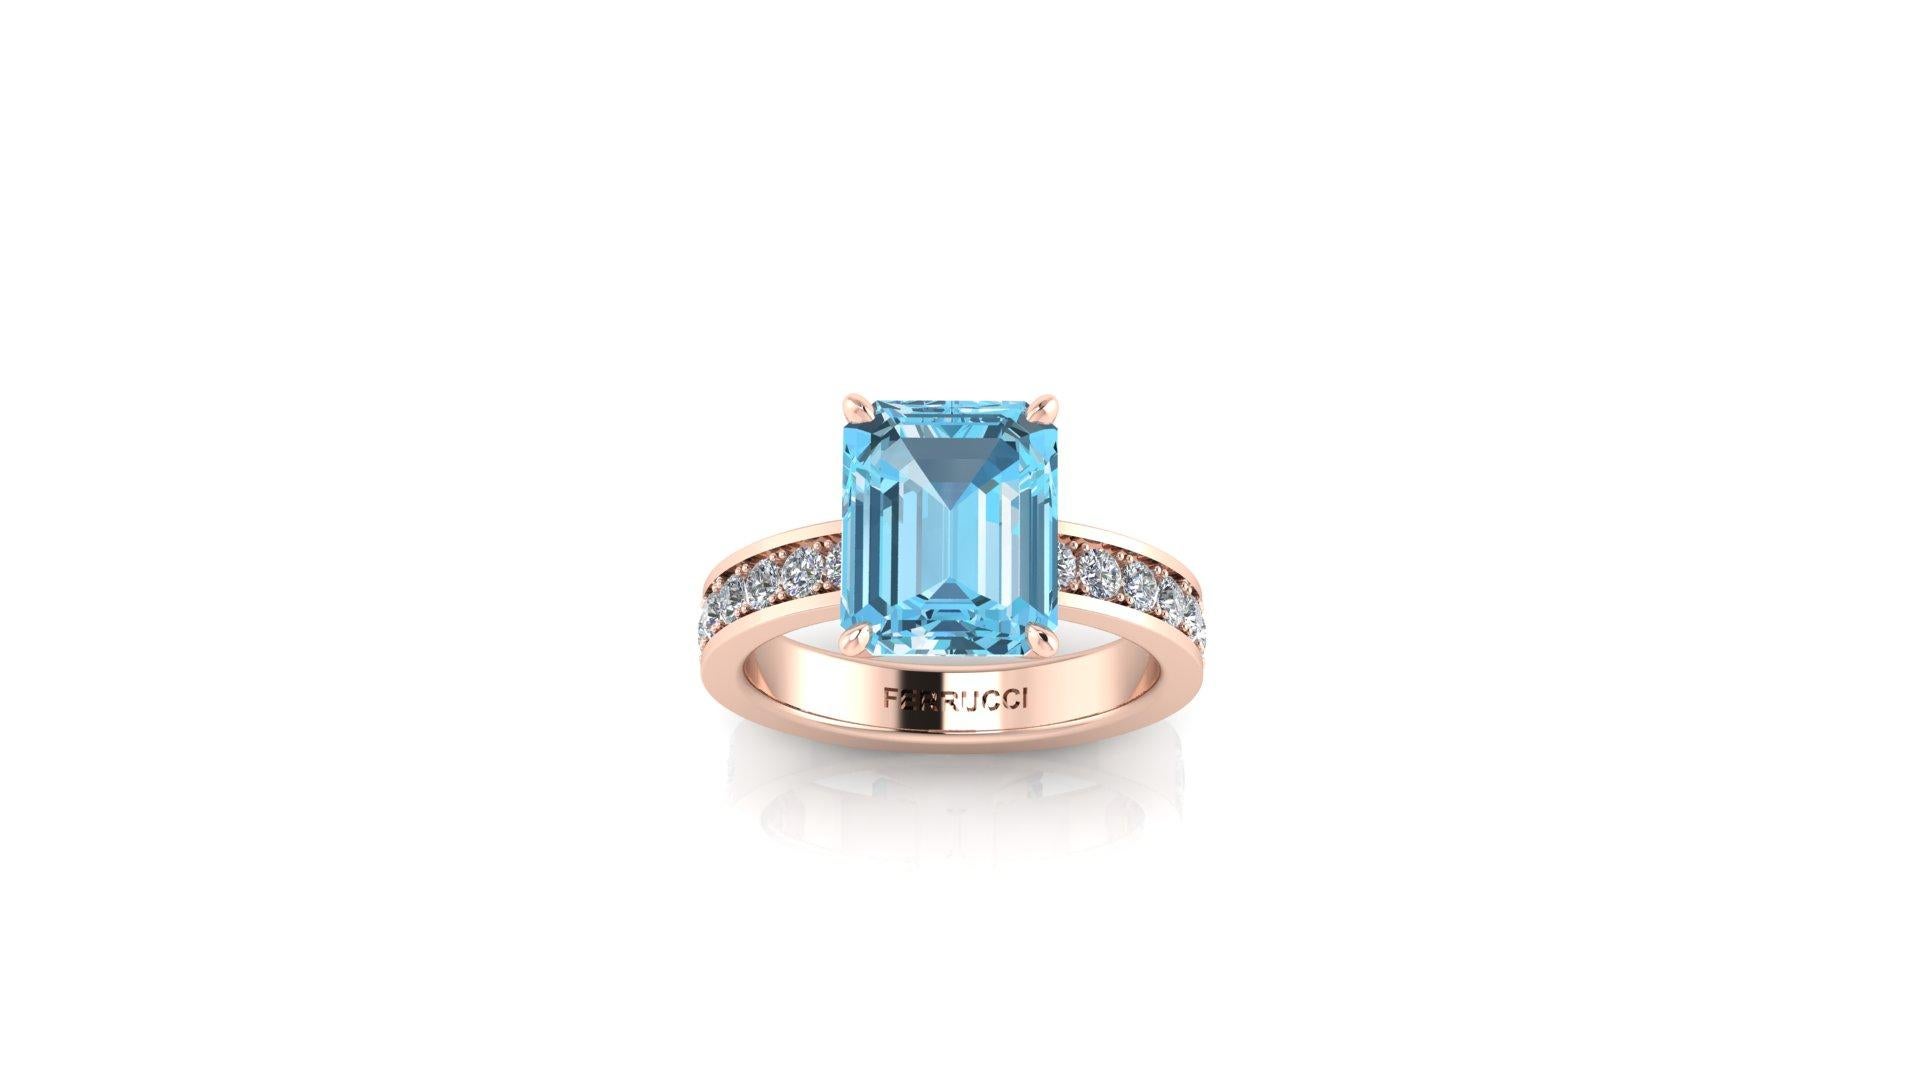 3.09 Carat Emerald Cut Aquamarine with Pave' White Diamonds 18k Rose Gold Ring In New Condition For Sale In New York, NY